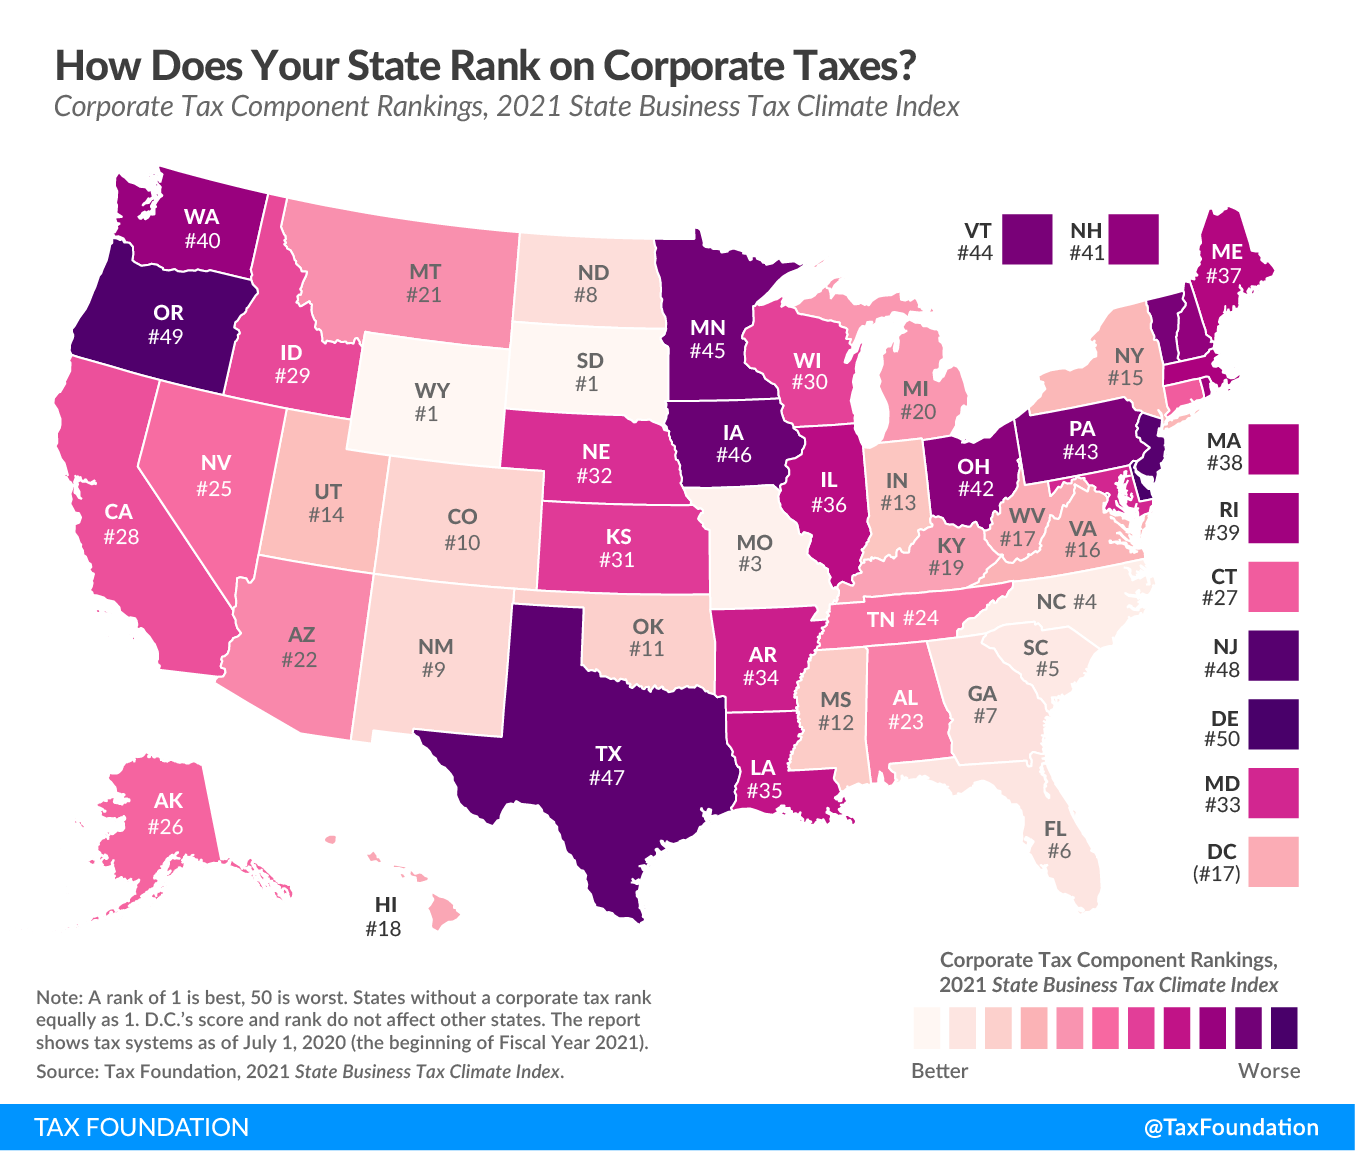 Ranking state corporate tax codes on the 2021 State Business Tax Climate Index. Best and worst corporate tax codes in the United States